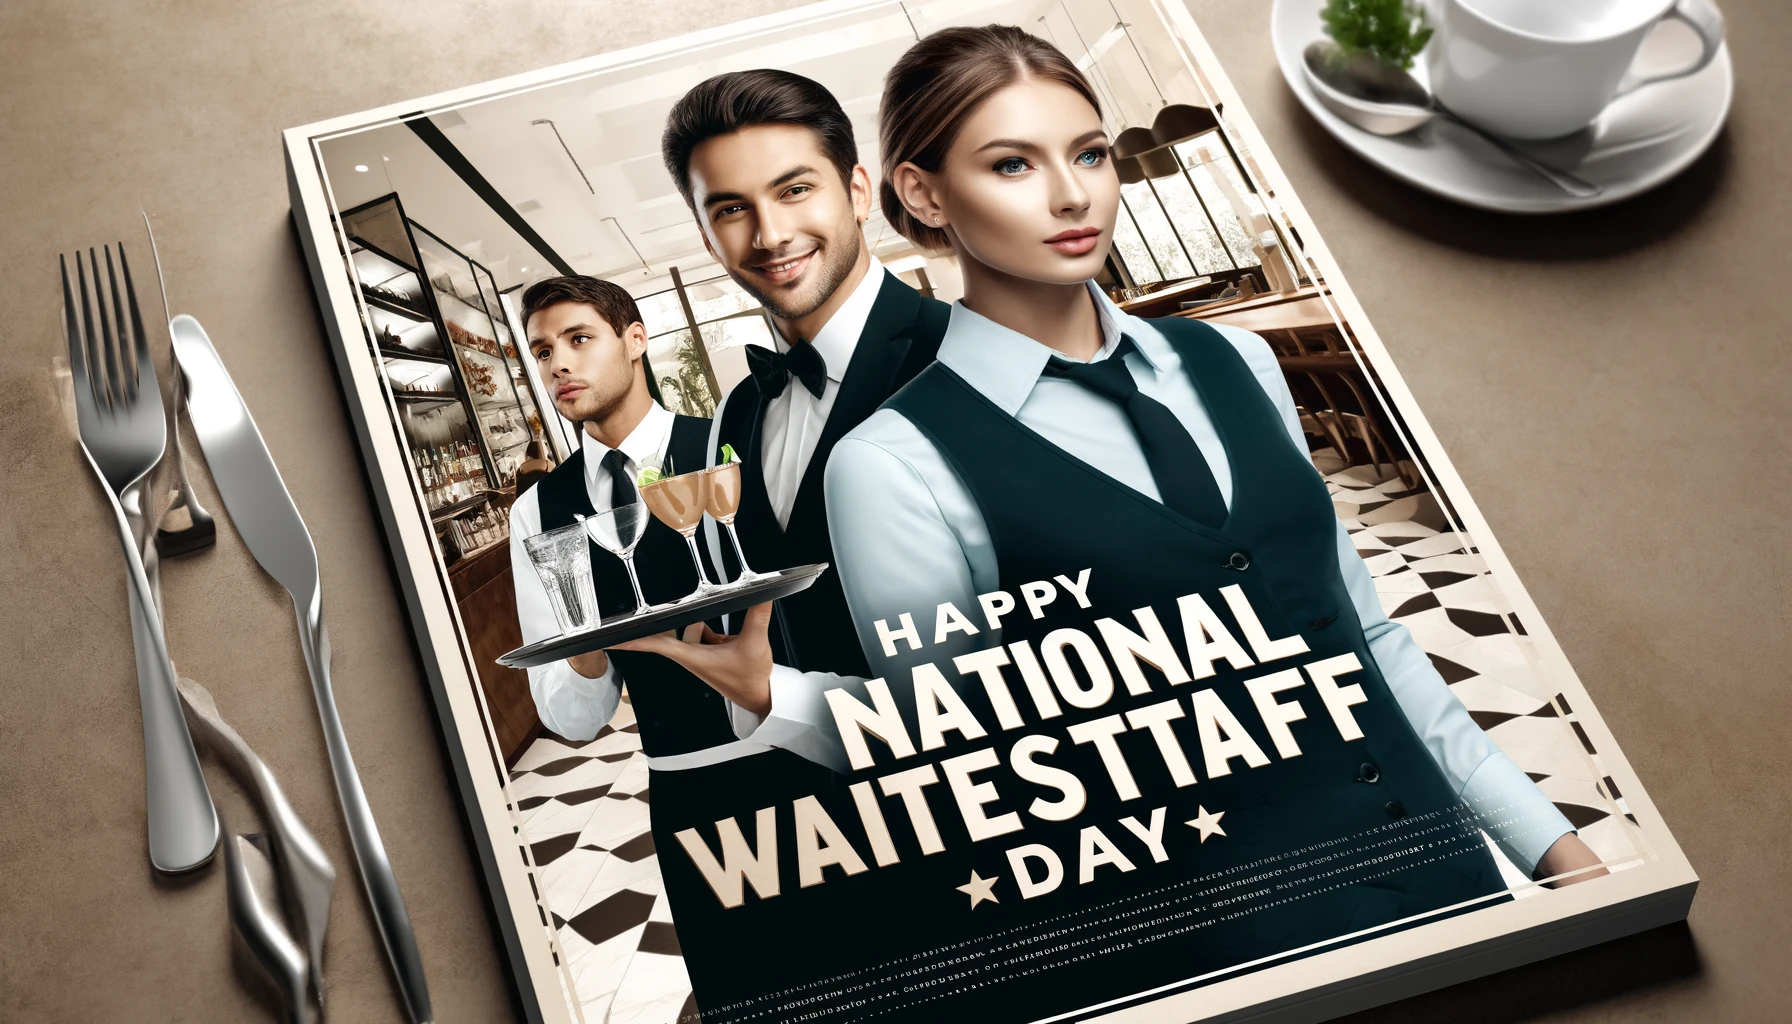 National Waitstaff Day Quotes, Wishes 280+